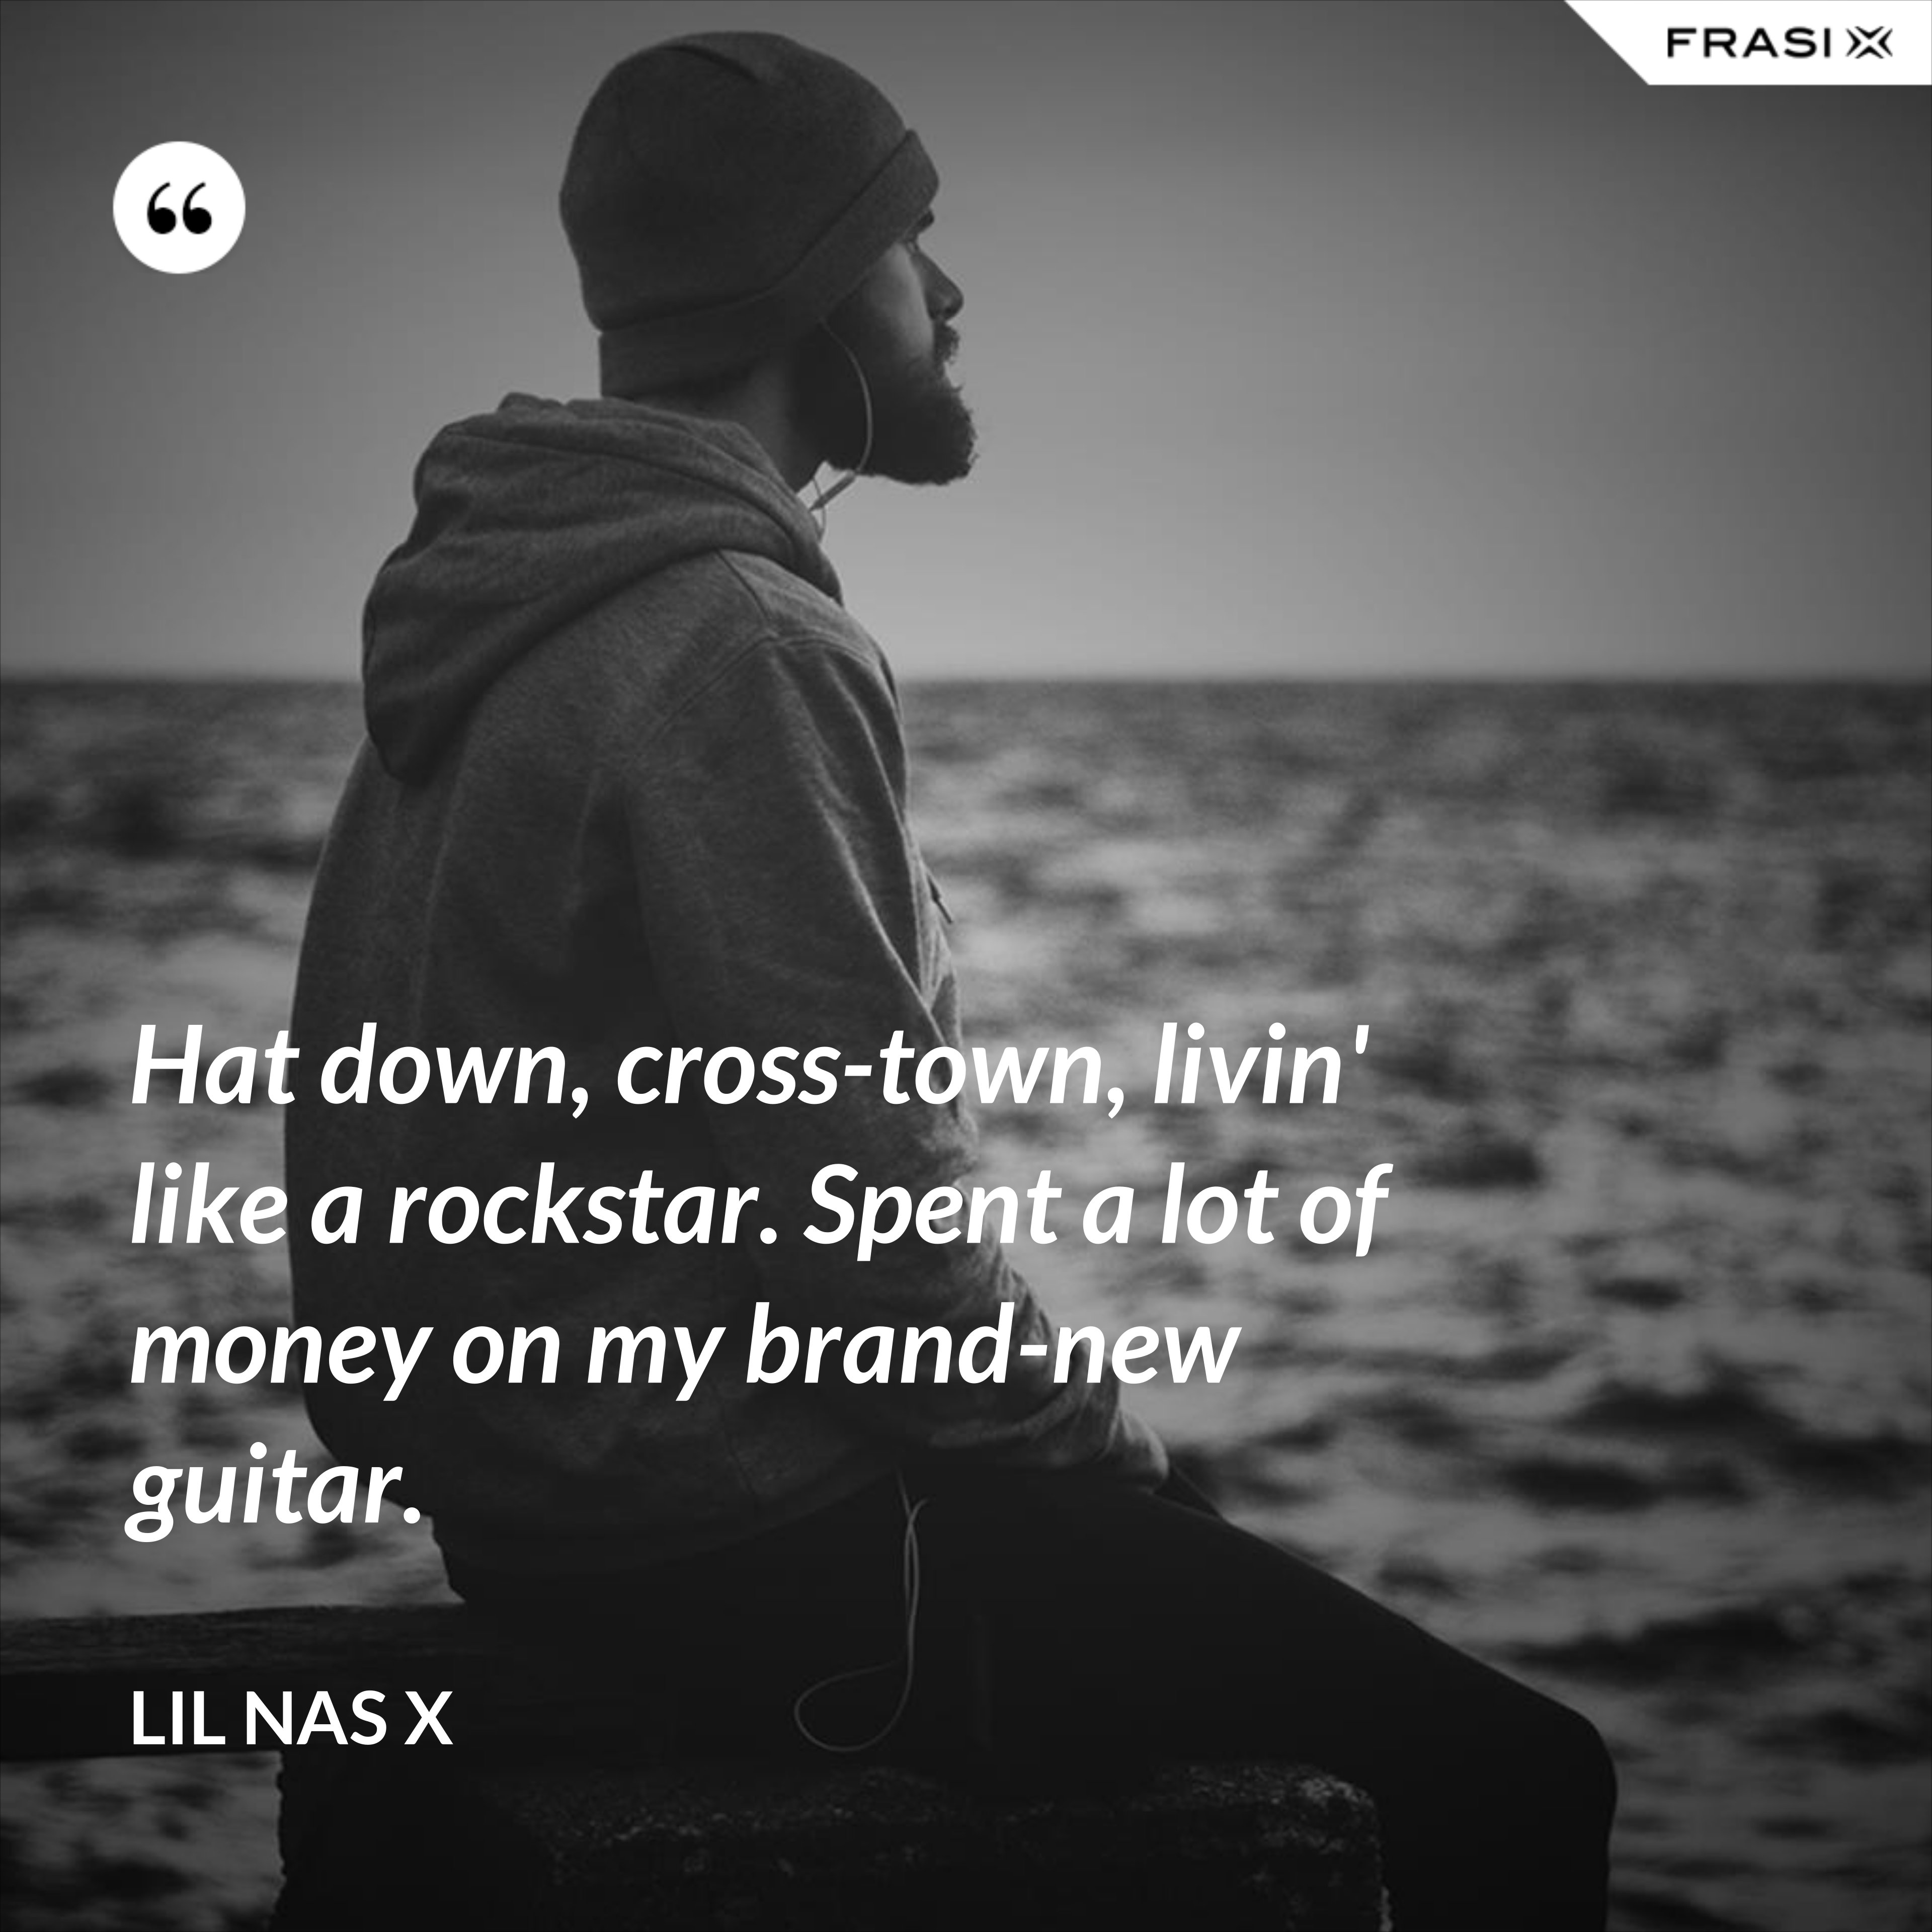 Hat down, cross-town, livin' like a rockstar. Spent a lot of money on my brand-new guitar. - Lil Nas X